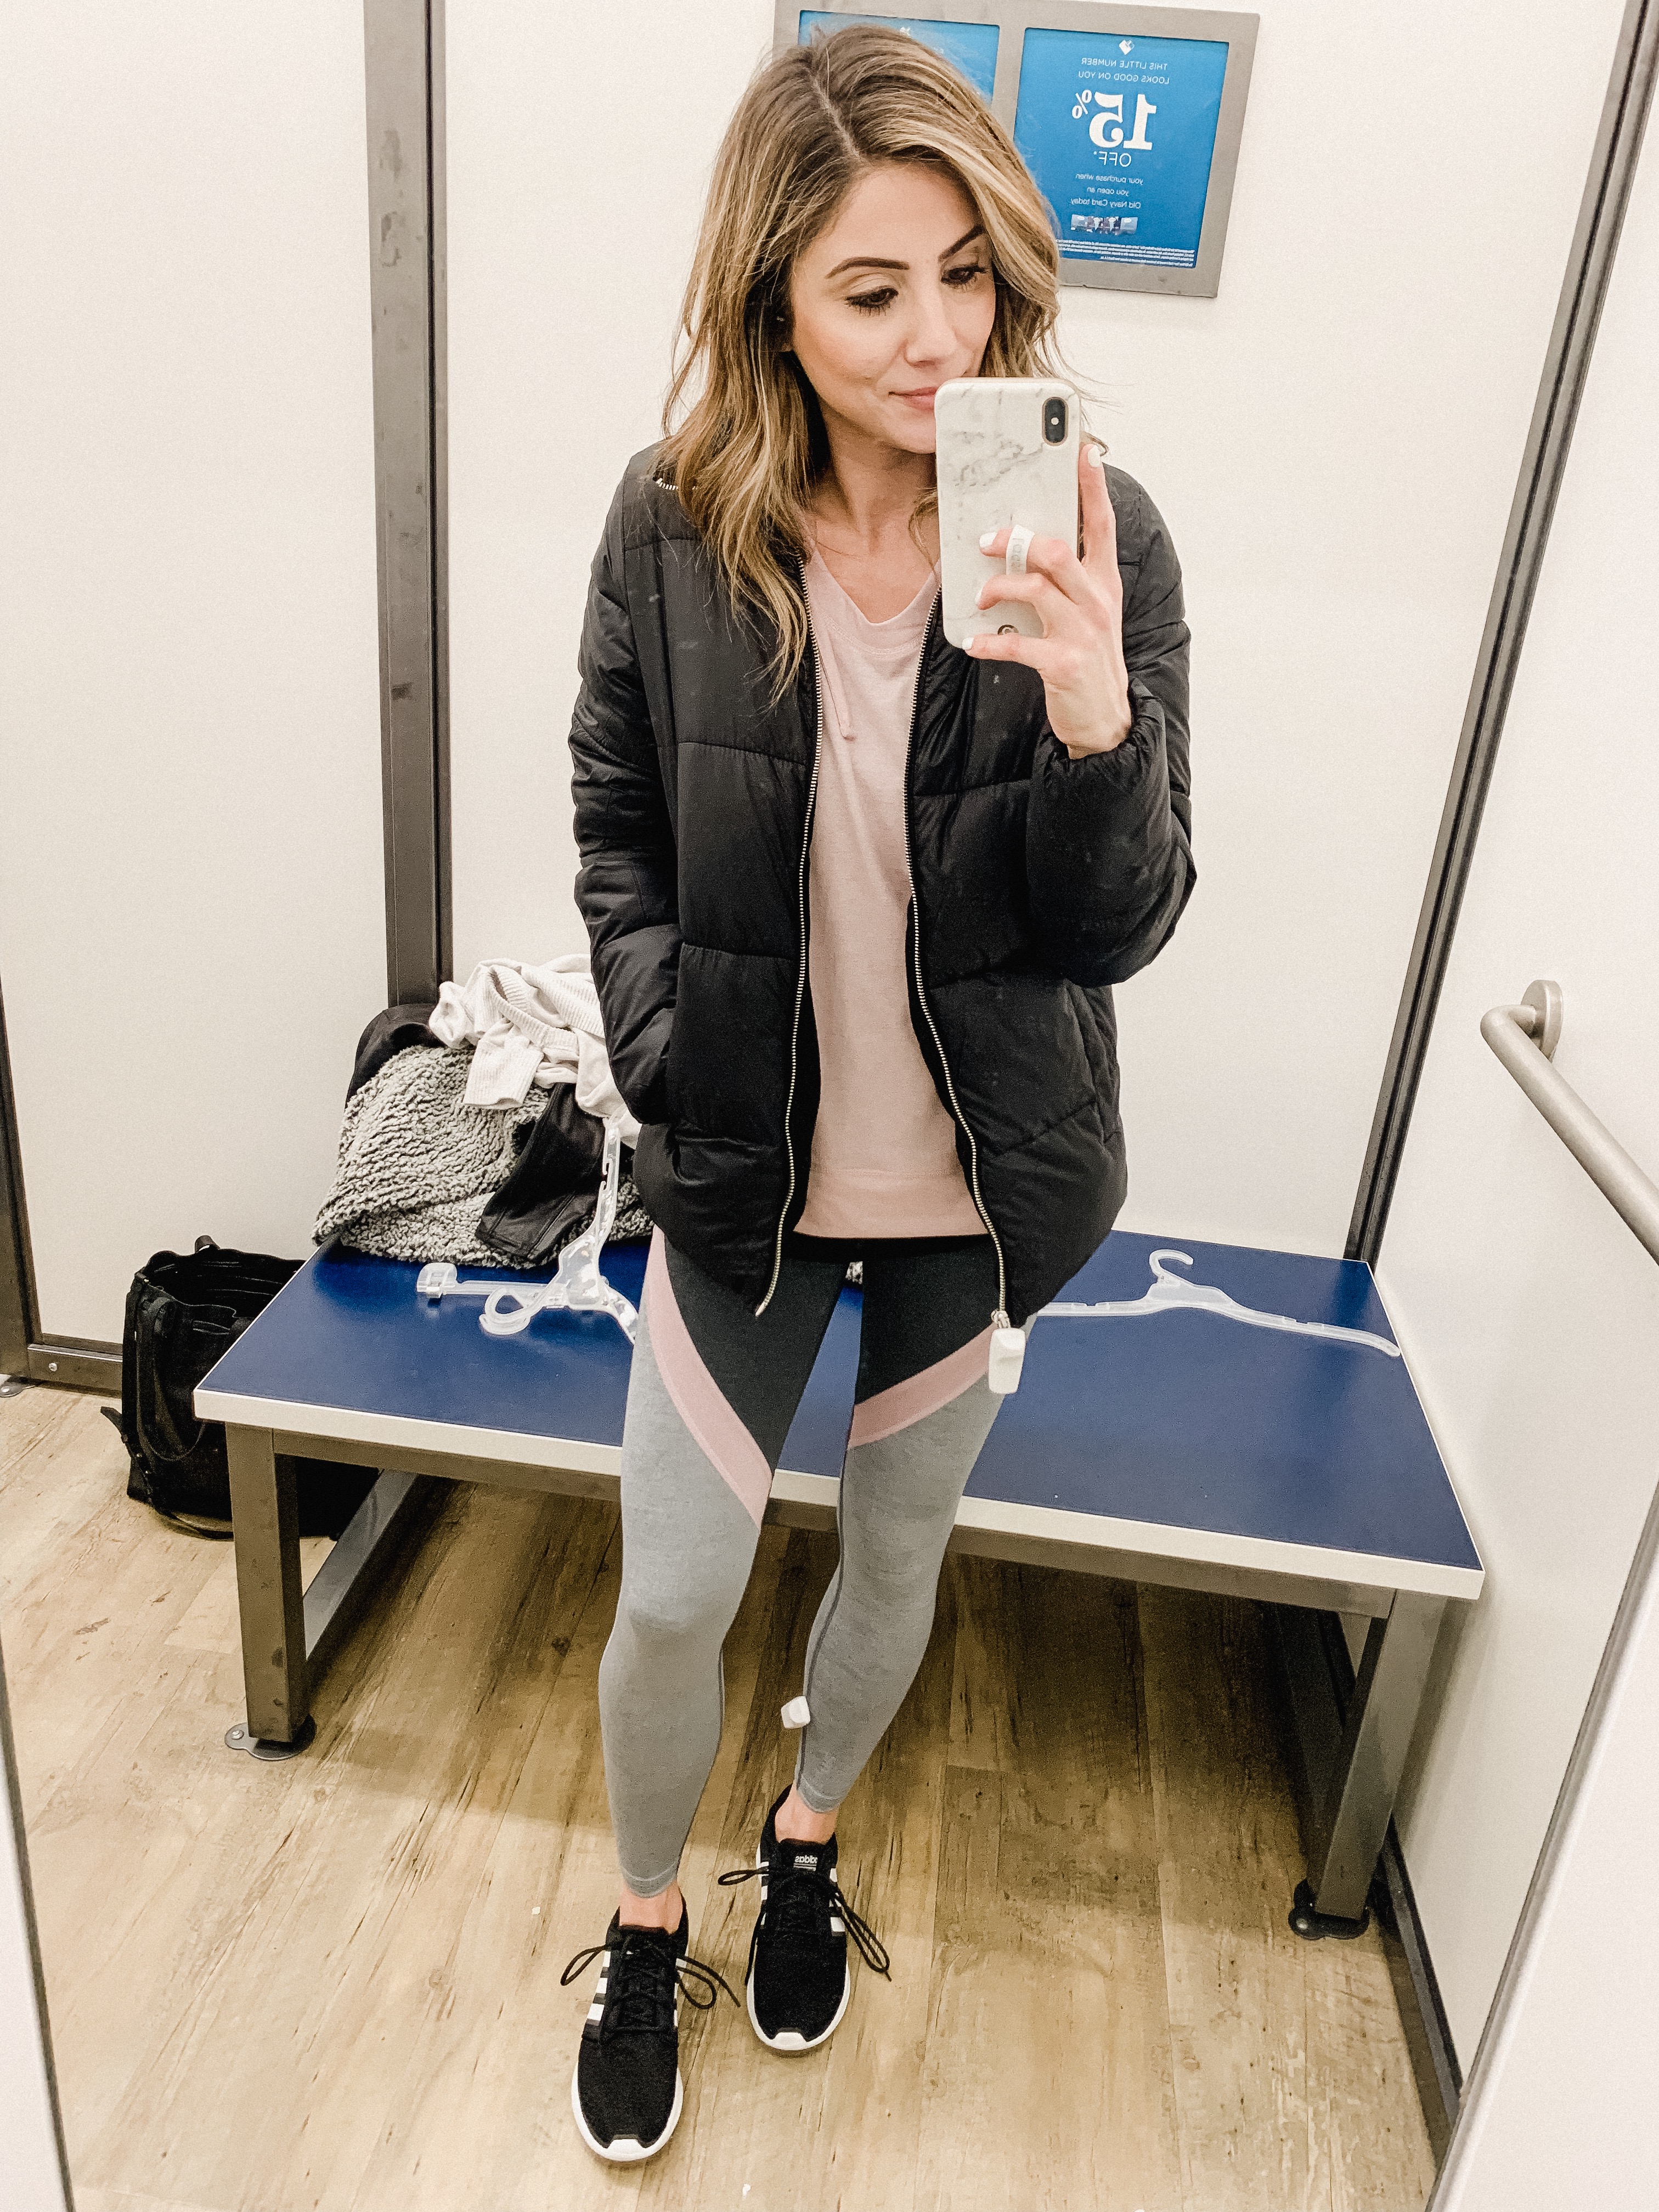 Connecticut life and style blogger Lauren McBride shares and Old Navy try on featuring athletic wear and ways to transition to athleisure.